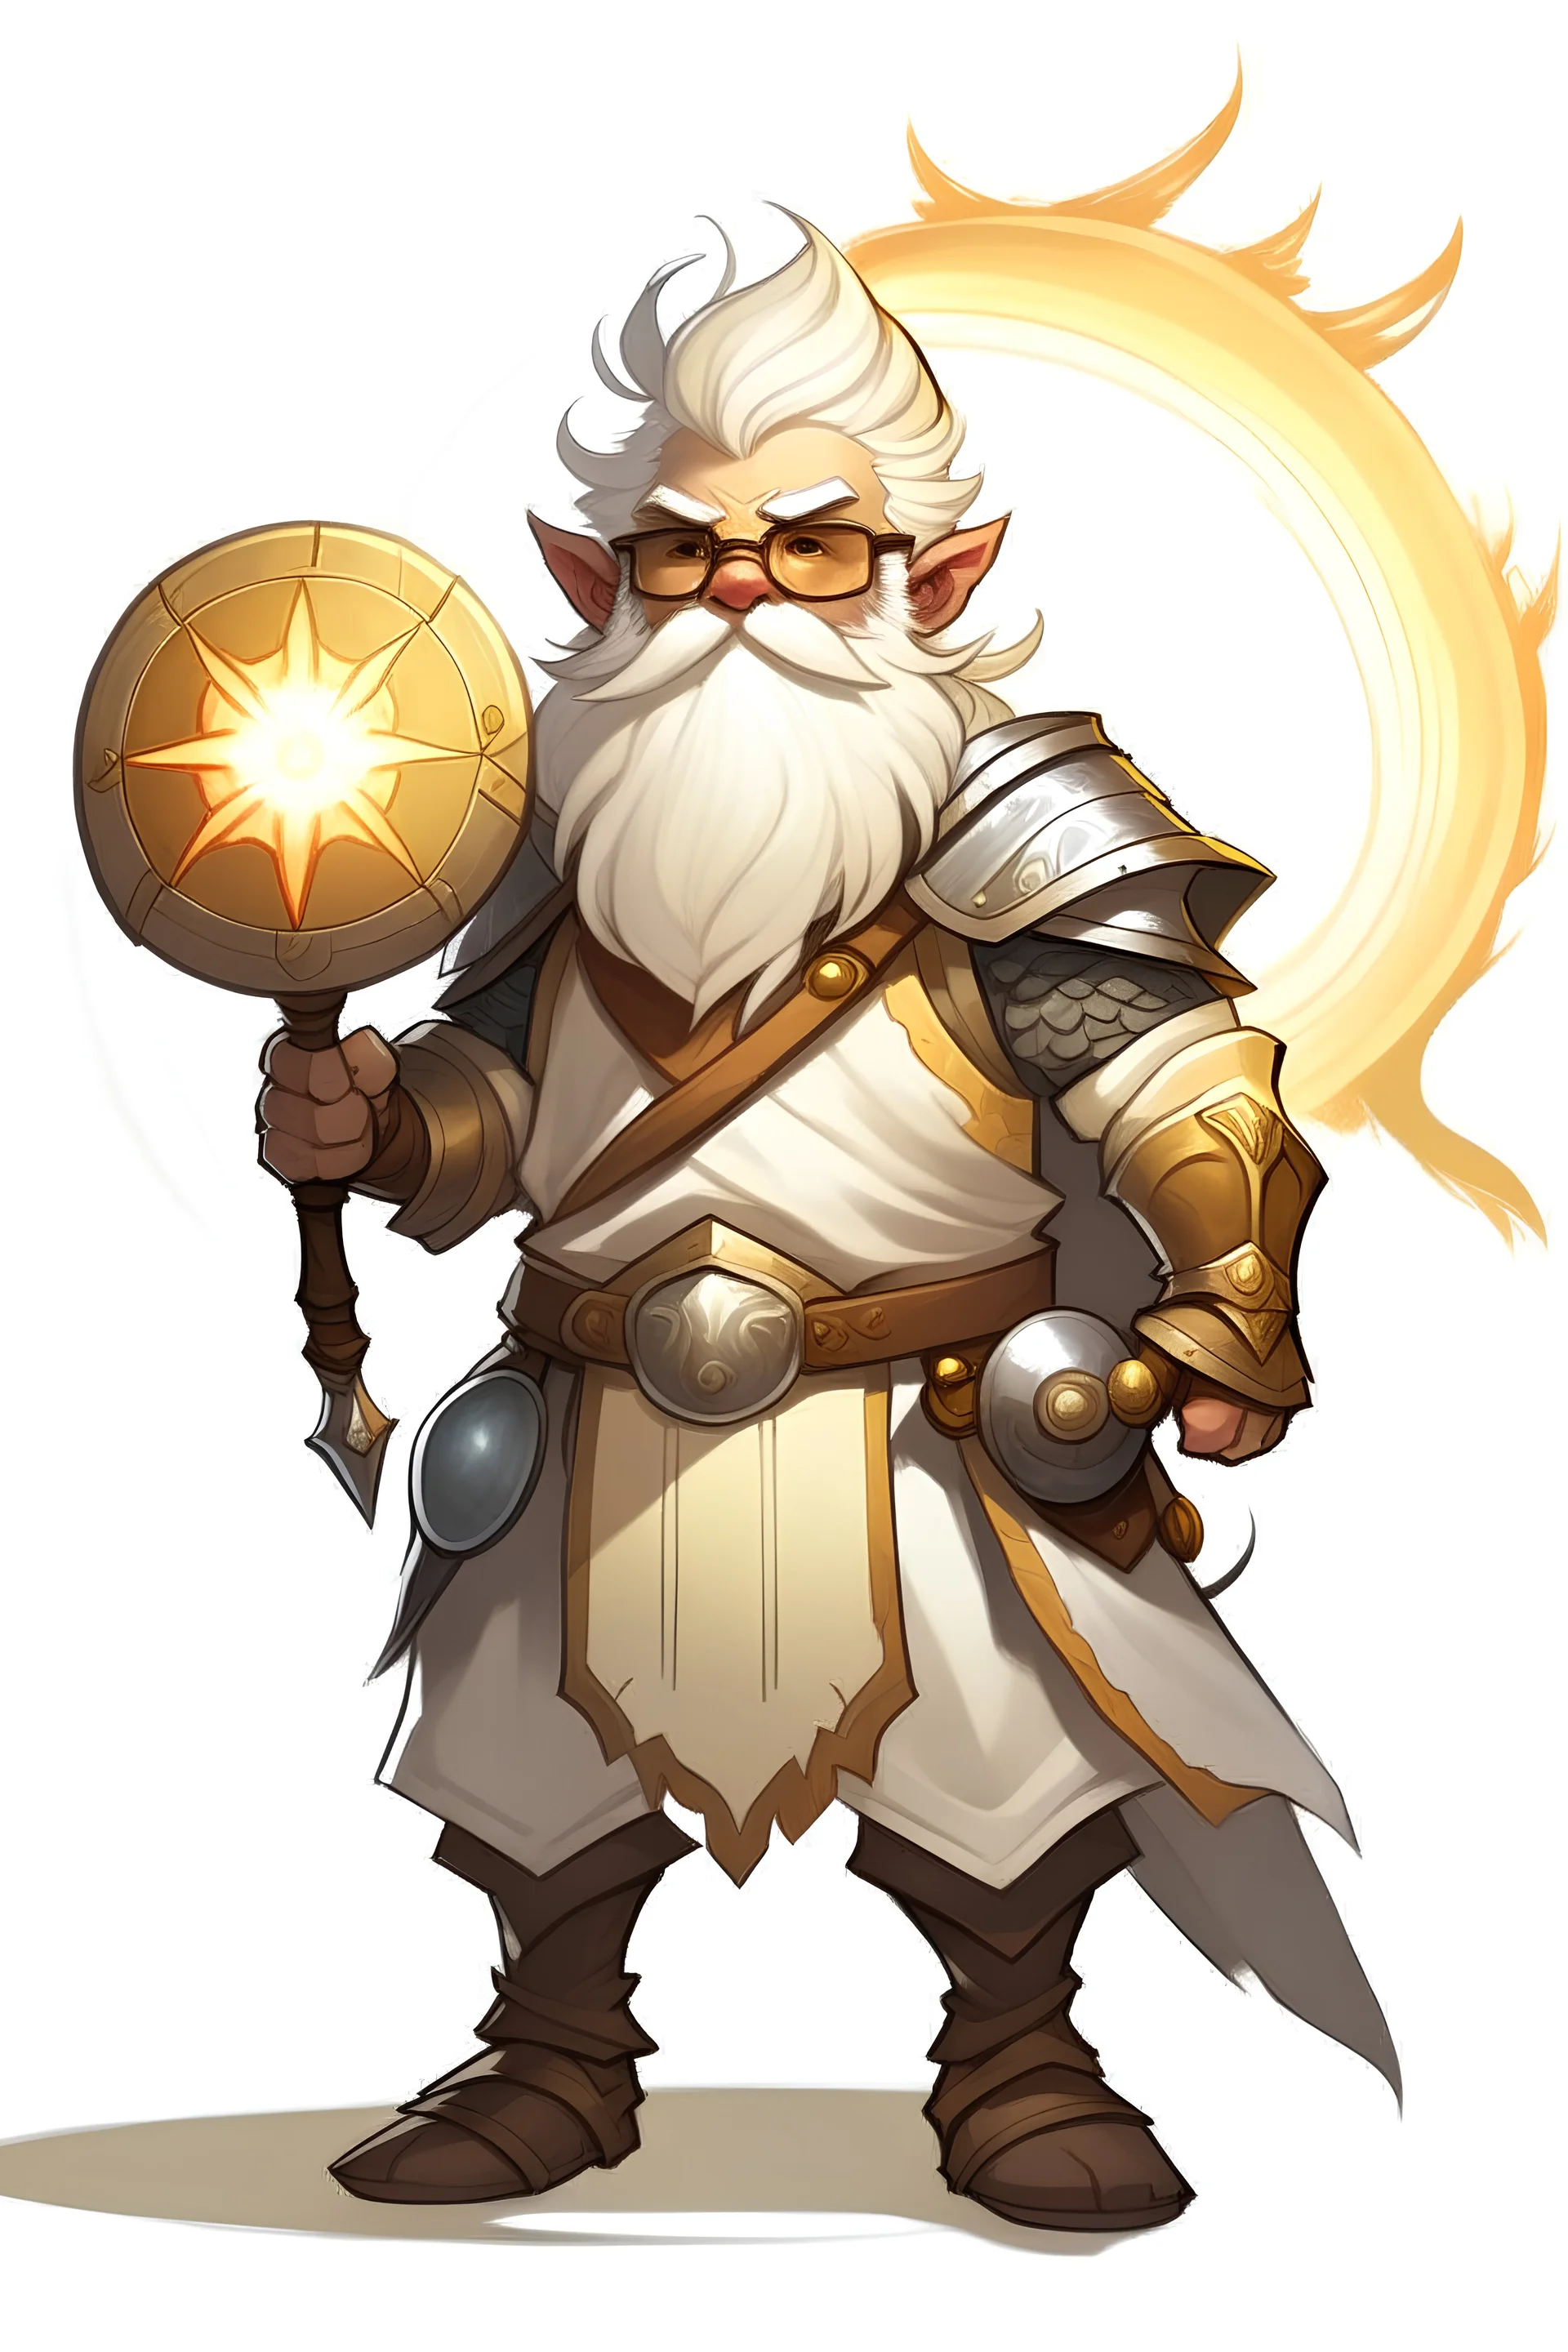 dnd character art of cleric of light, short and stocky, Gnome, Wearing a Circlet over his head, Holding a large shield shaped like a sun, wielding a small mace, Short white beard, Short hair, wearing tinkerers glasses,